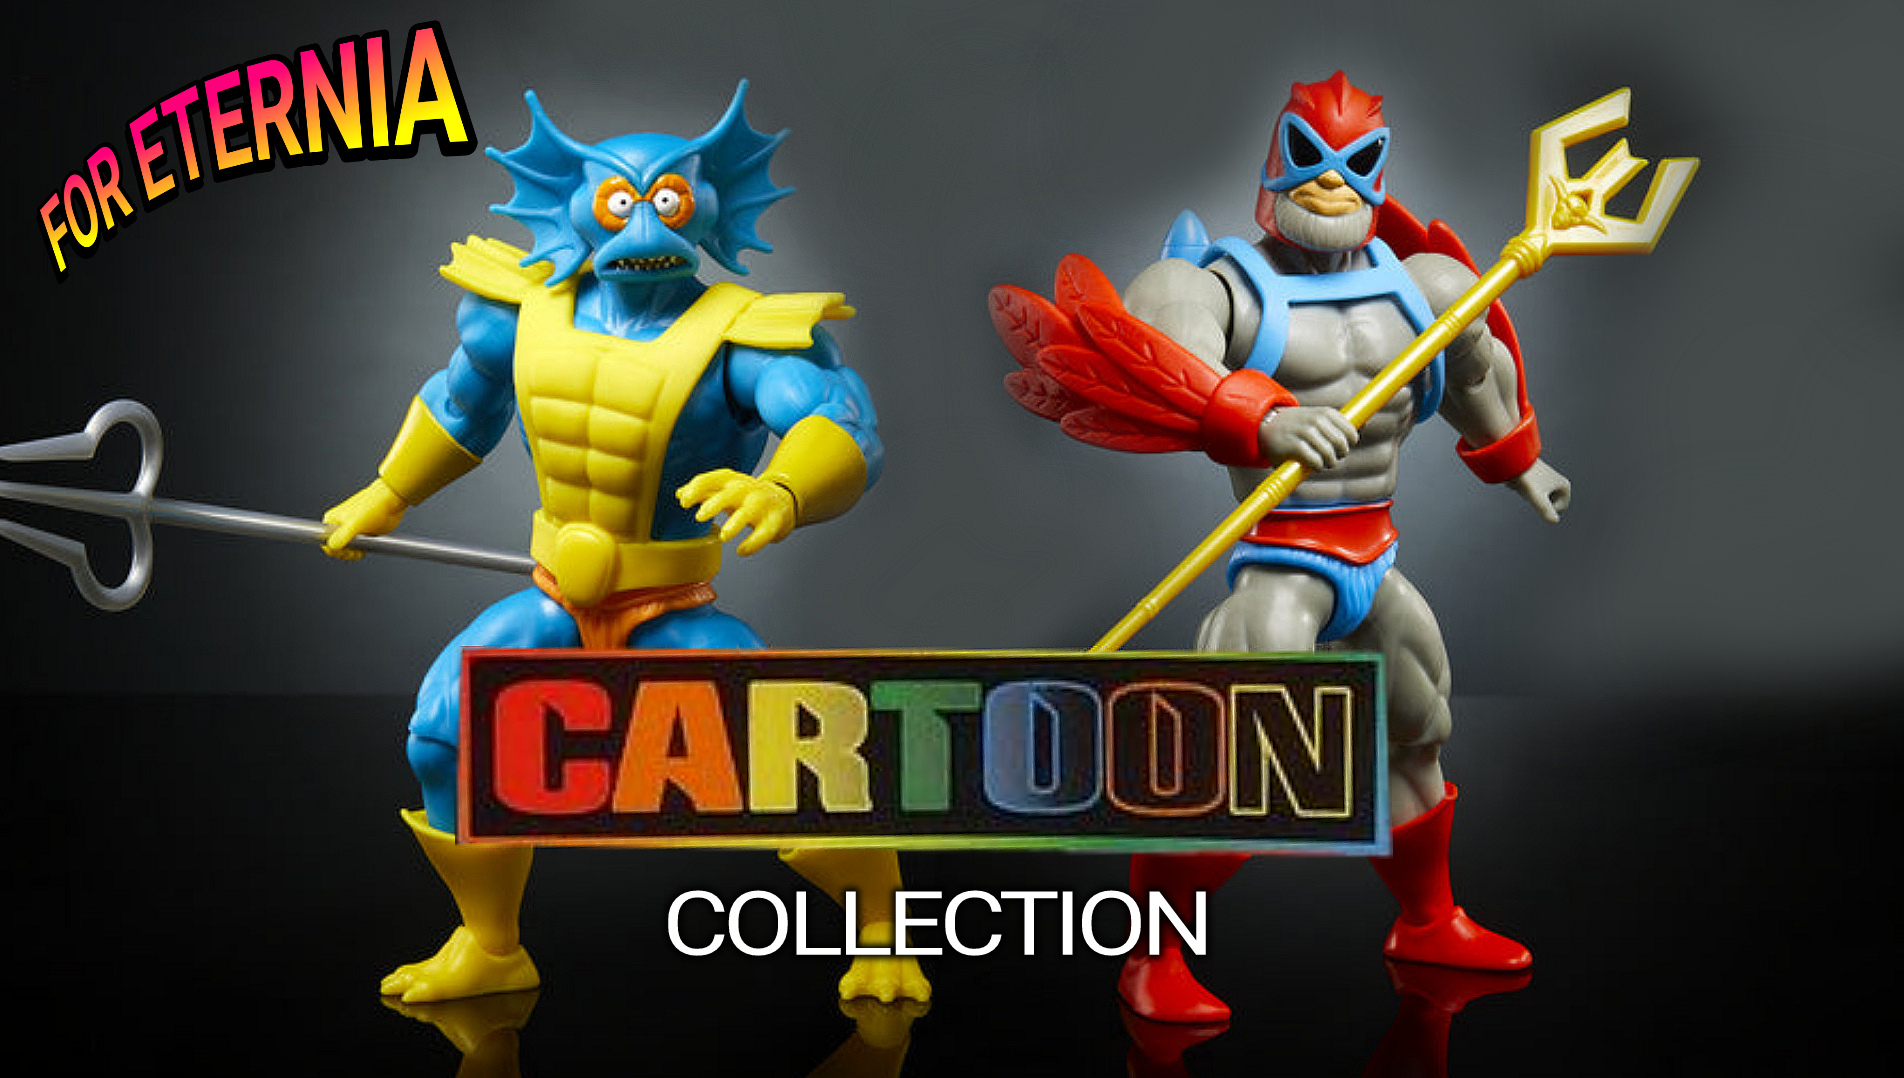 Stratos and Mer-Man “He-Man and the Masters of the Universe” Origins “Cartoon Collection” action figure images revealed